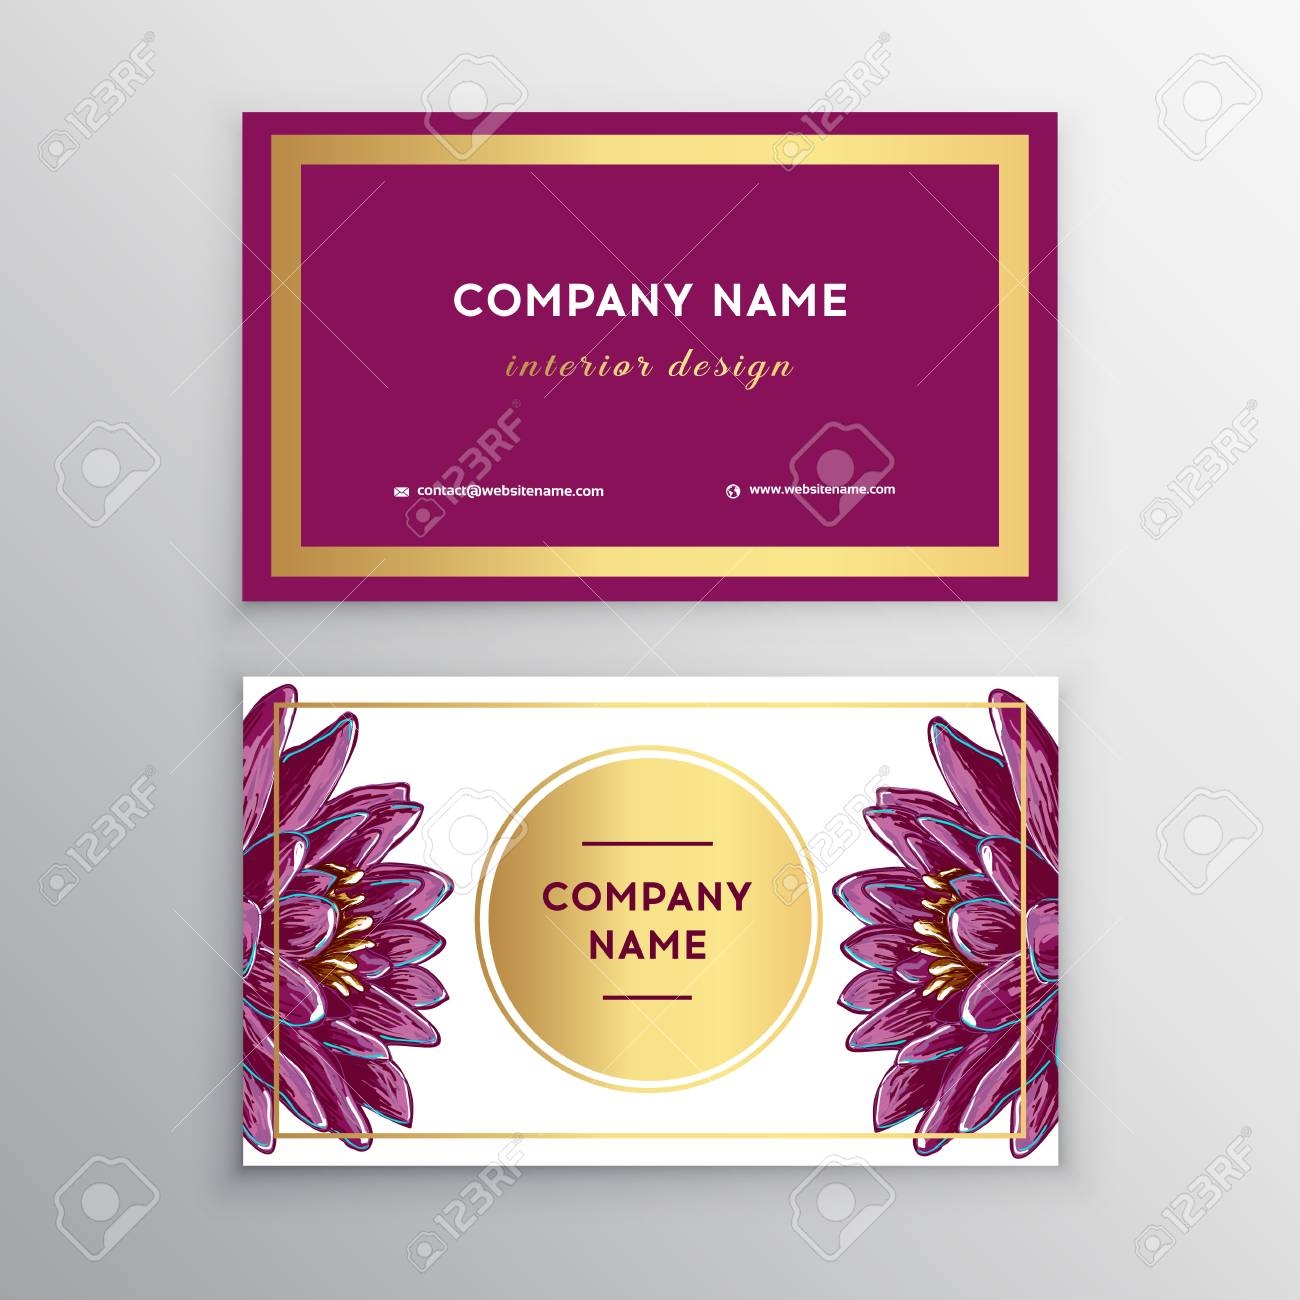 Makeup Artist Business Card Business Cards Template With Pink Lips Print Design Templates For Brochures Flyers Mobile Technologies And Online Services Royalty Free SVG Cliparts Vectors And Stock Illustration Image 94212387 - Free Online Business Card Templates Printable